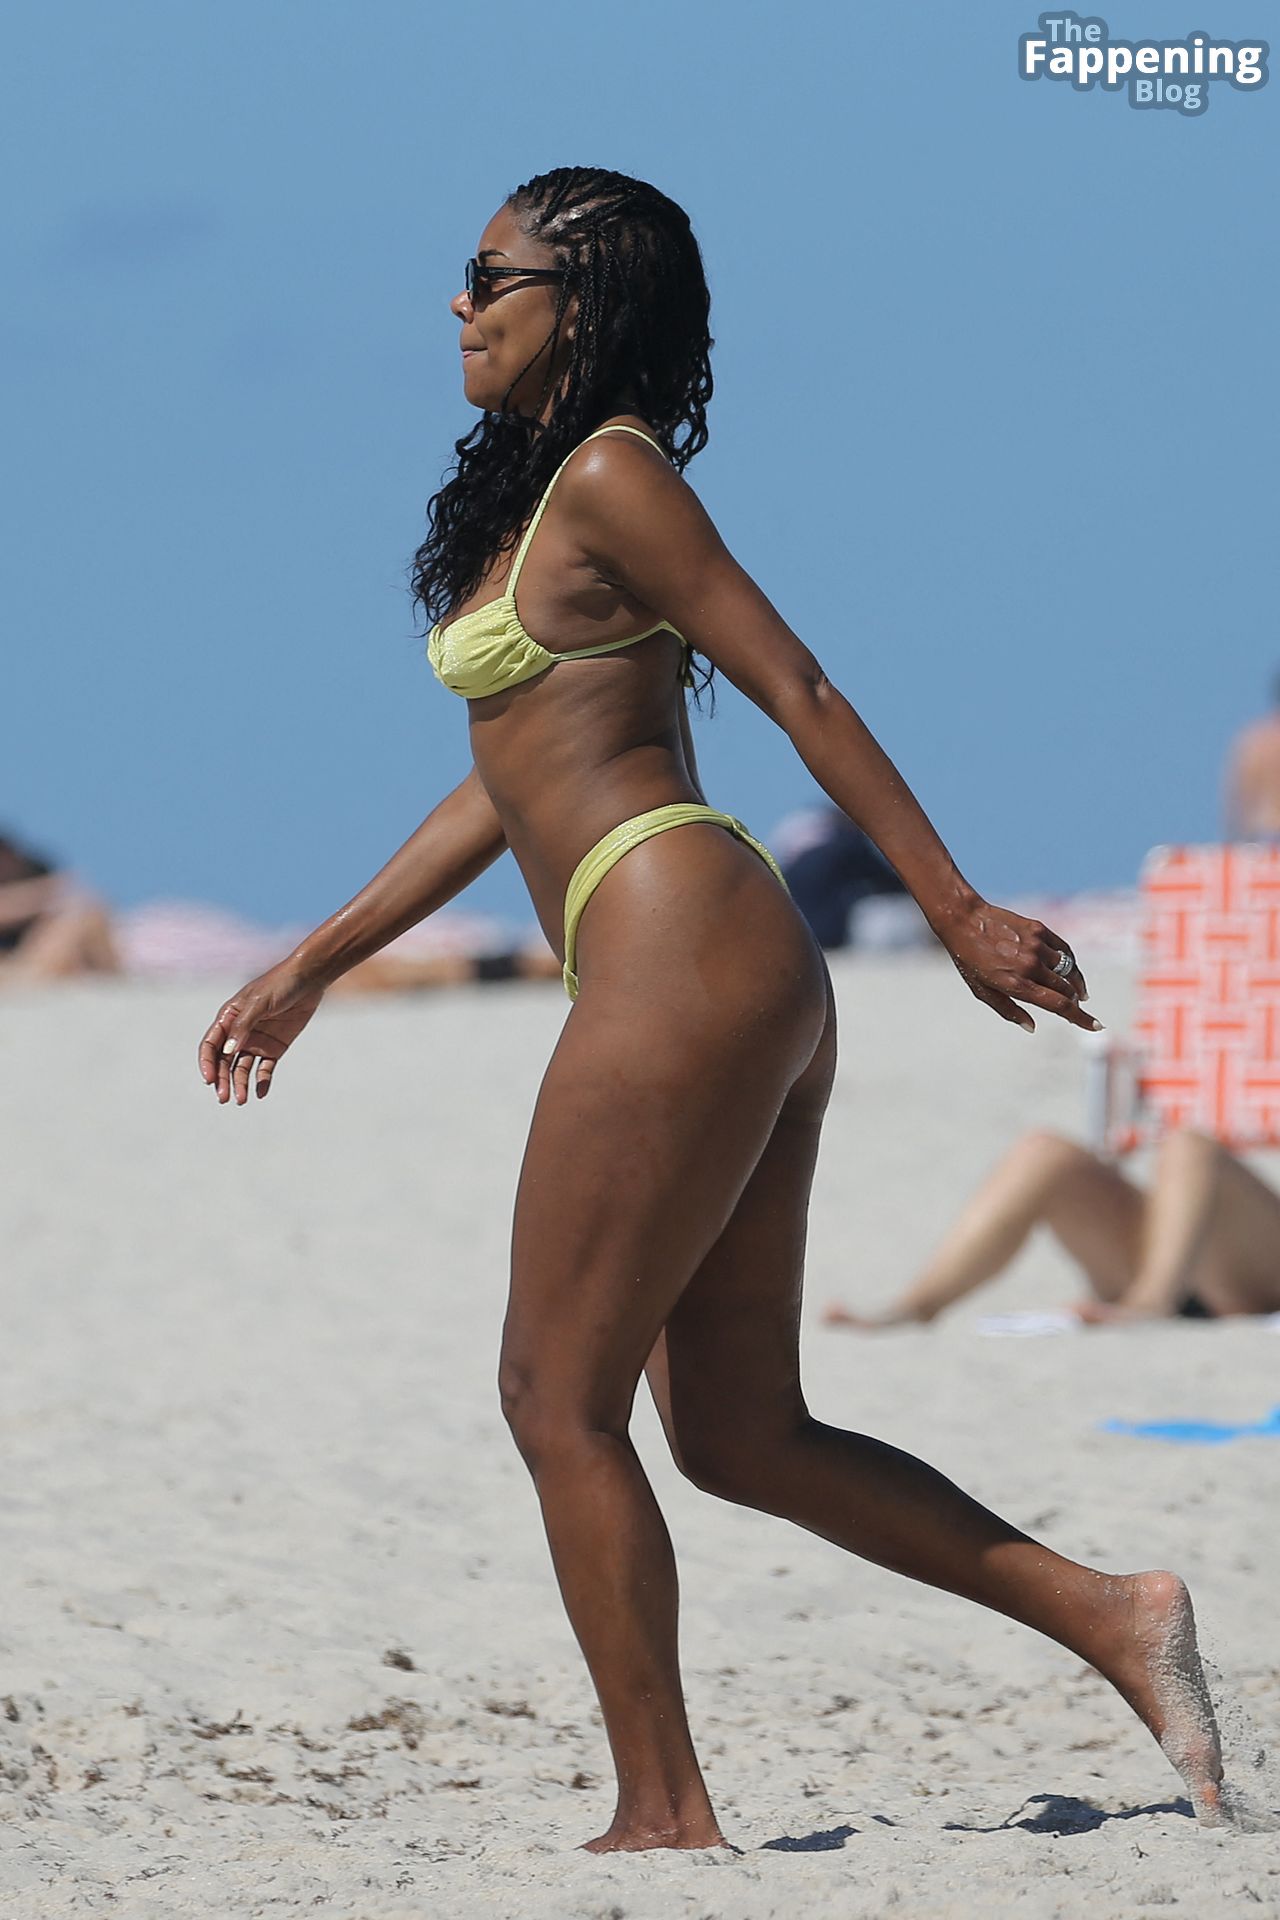 Gabrielle-Union-Sexy-The-Fappening-Blog-4.jpg